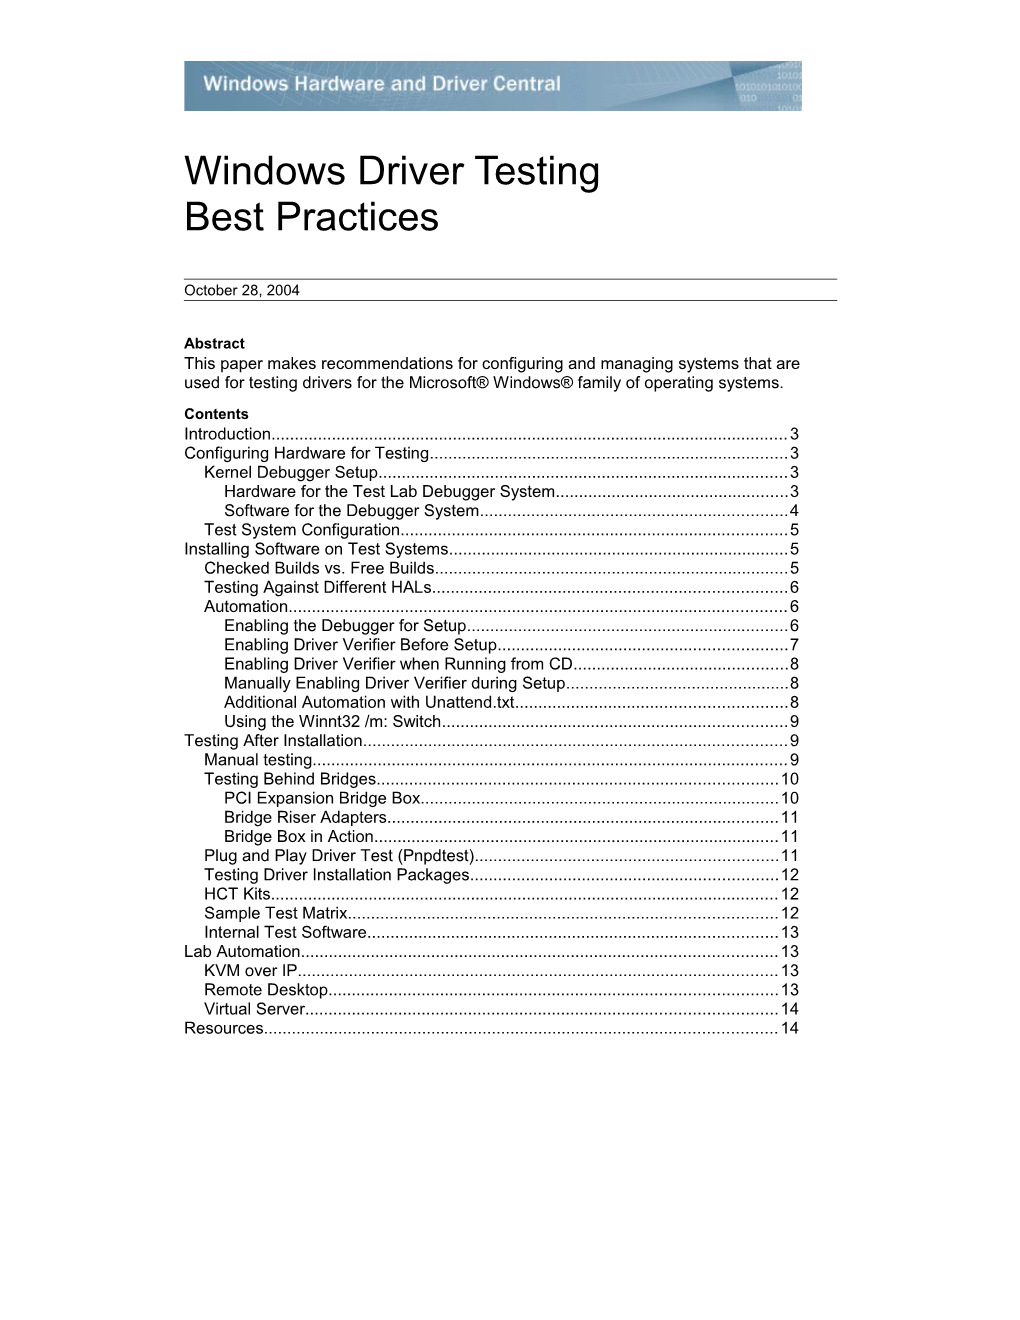 Windows Driver Testing Best Practices